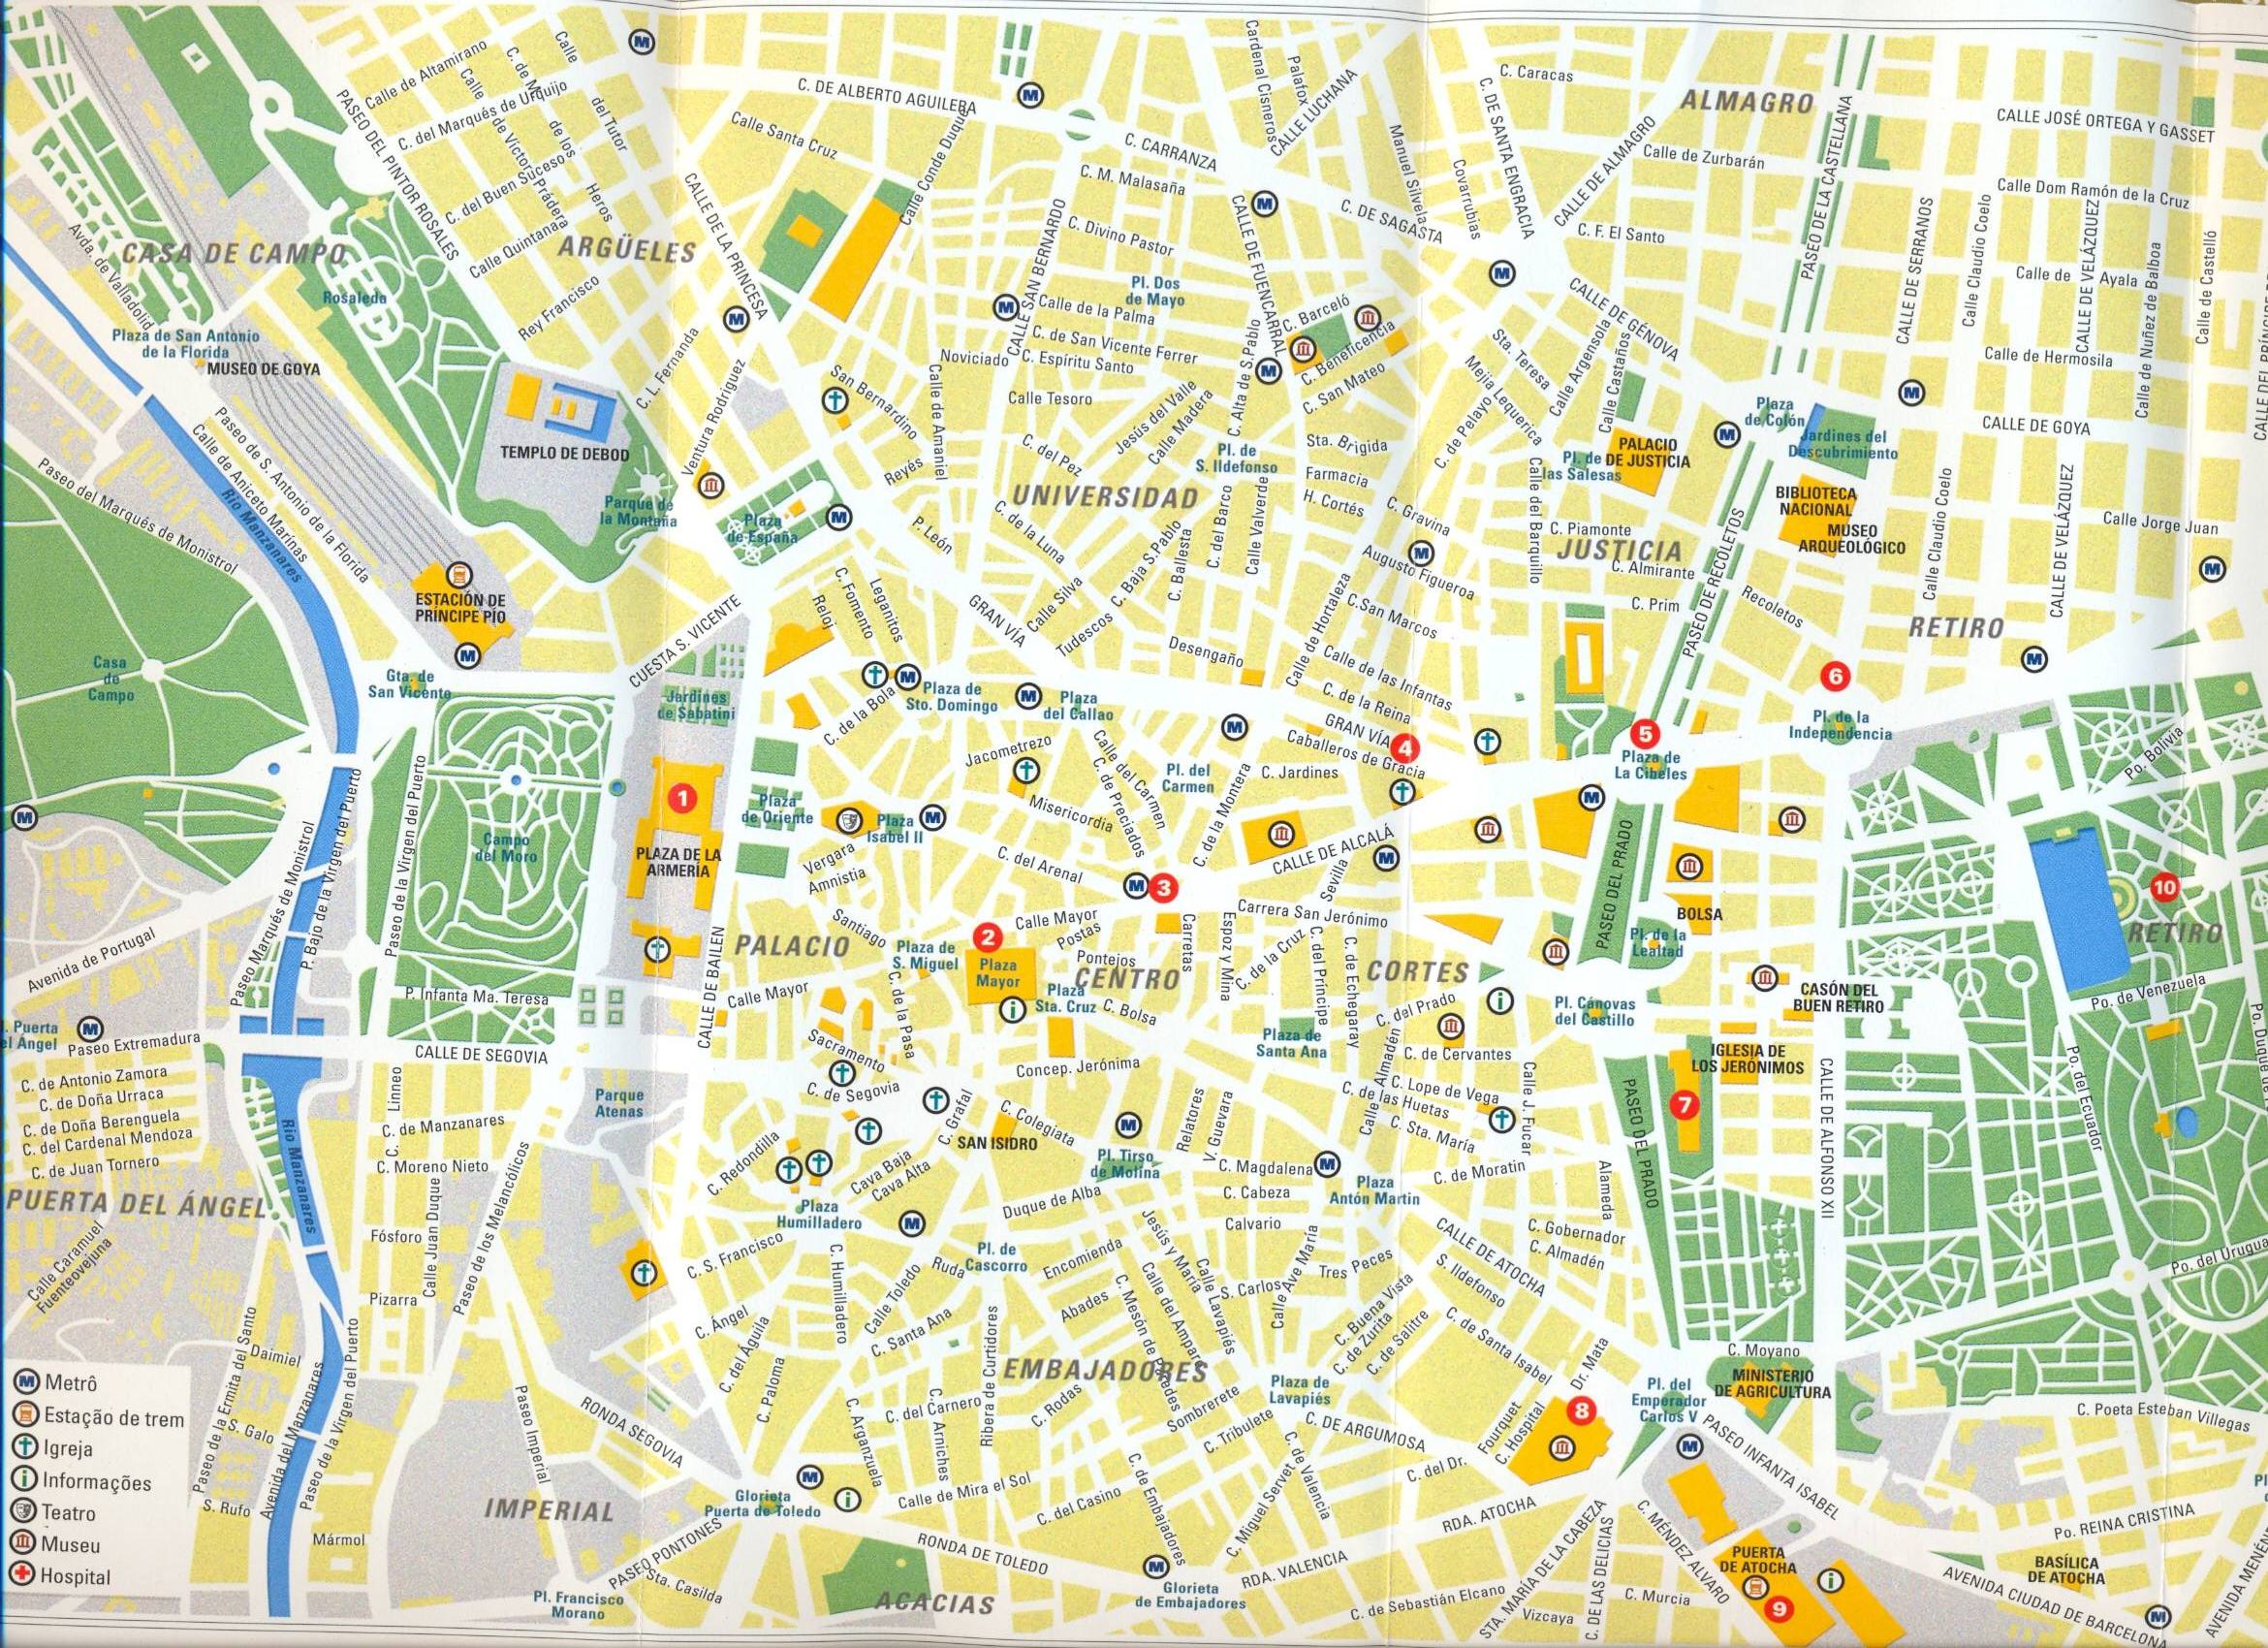 central madrid tourist map